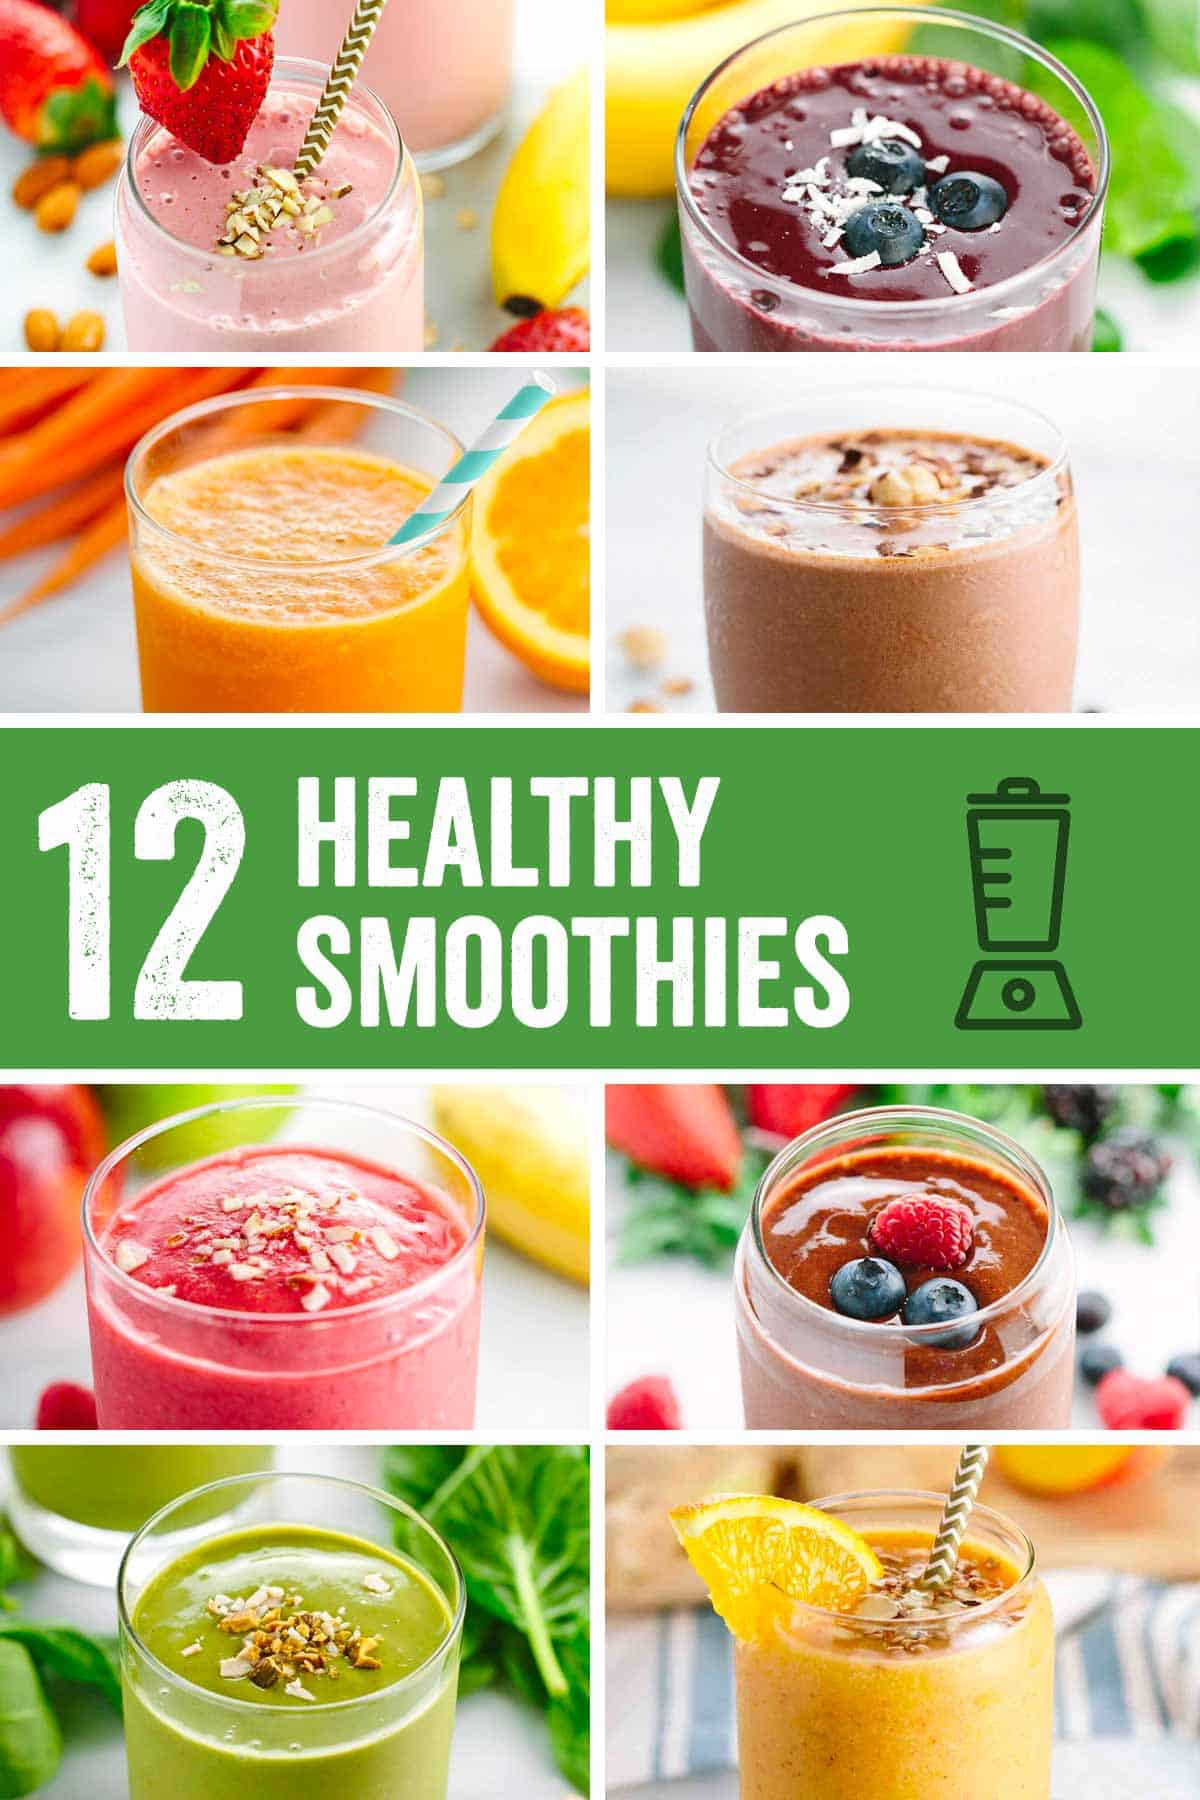 Are Fruit Smoothies Healthy For Breakfast
 Roundup Easy Five Minute Healthy Smoothie Recipes